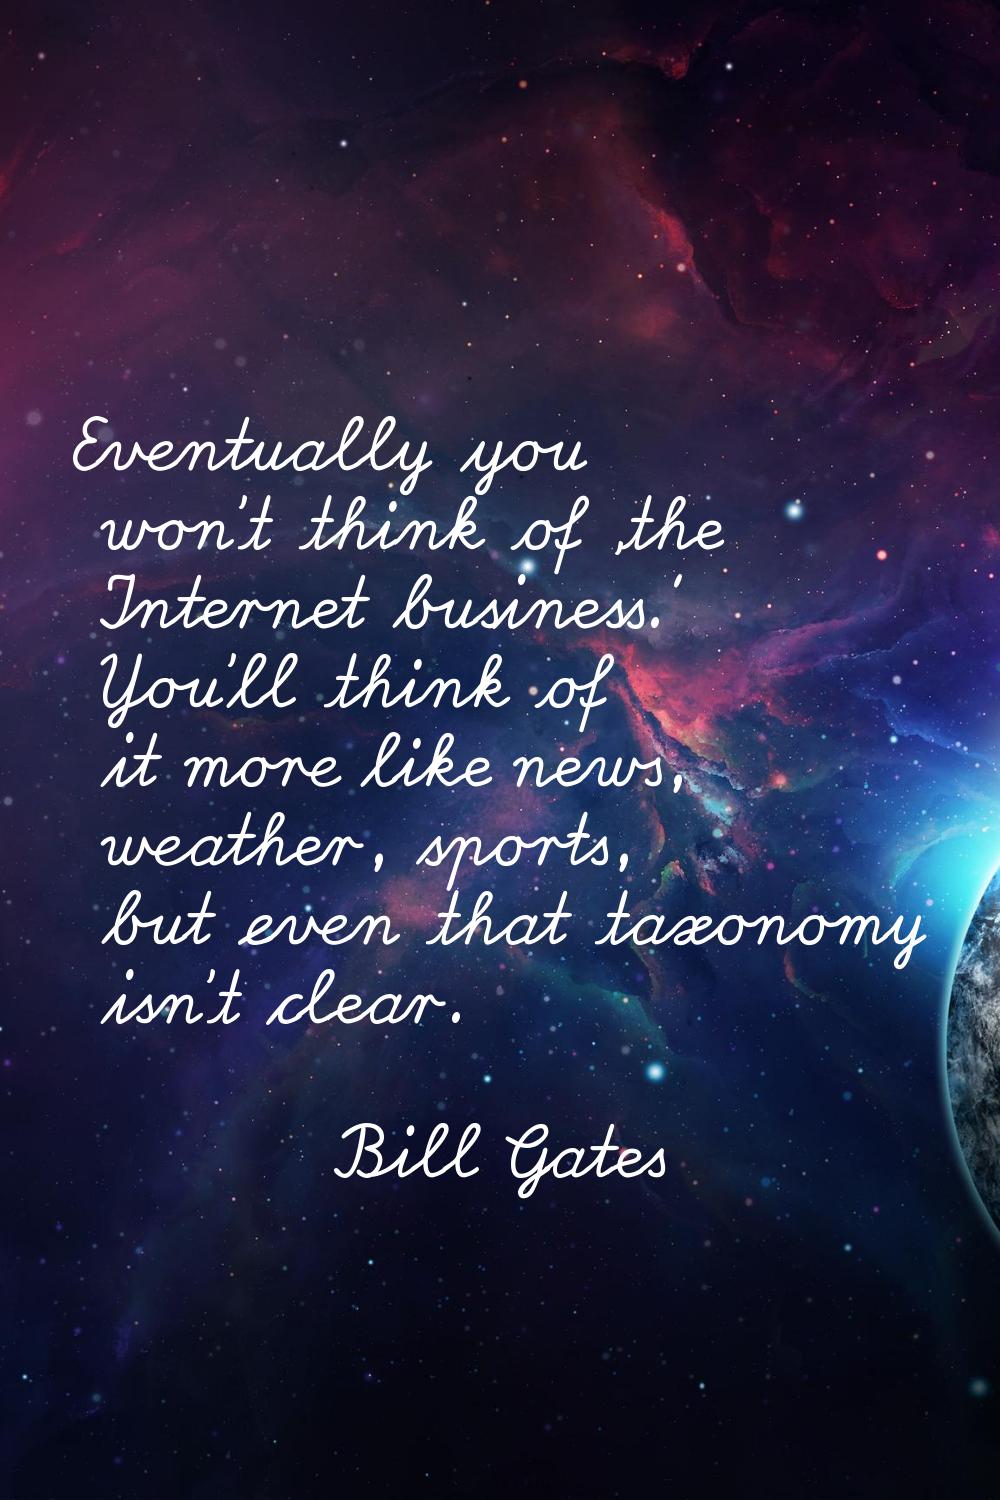 Eventually you won't think of 'the Internet business.' You'll think of it more like news, weather, 